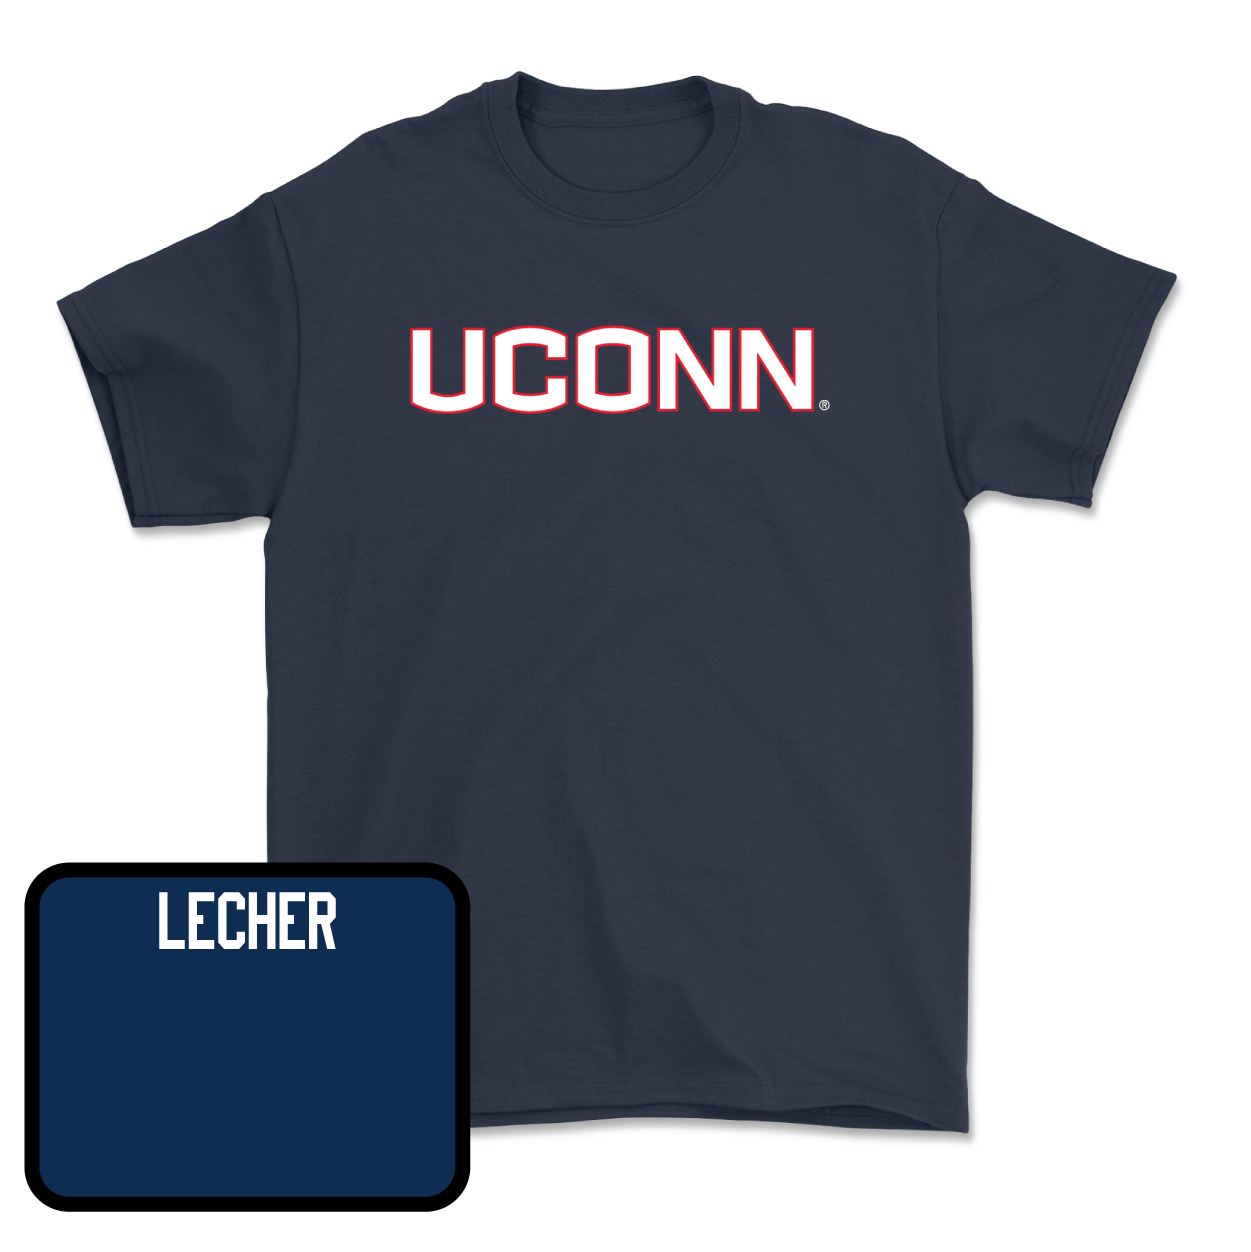 Navy Women's Rowing UConn Tee Small / Sydell Lecher